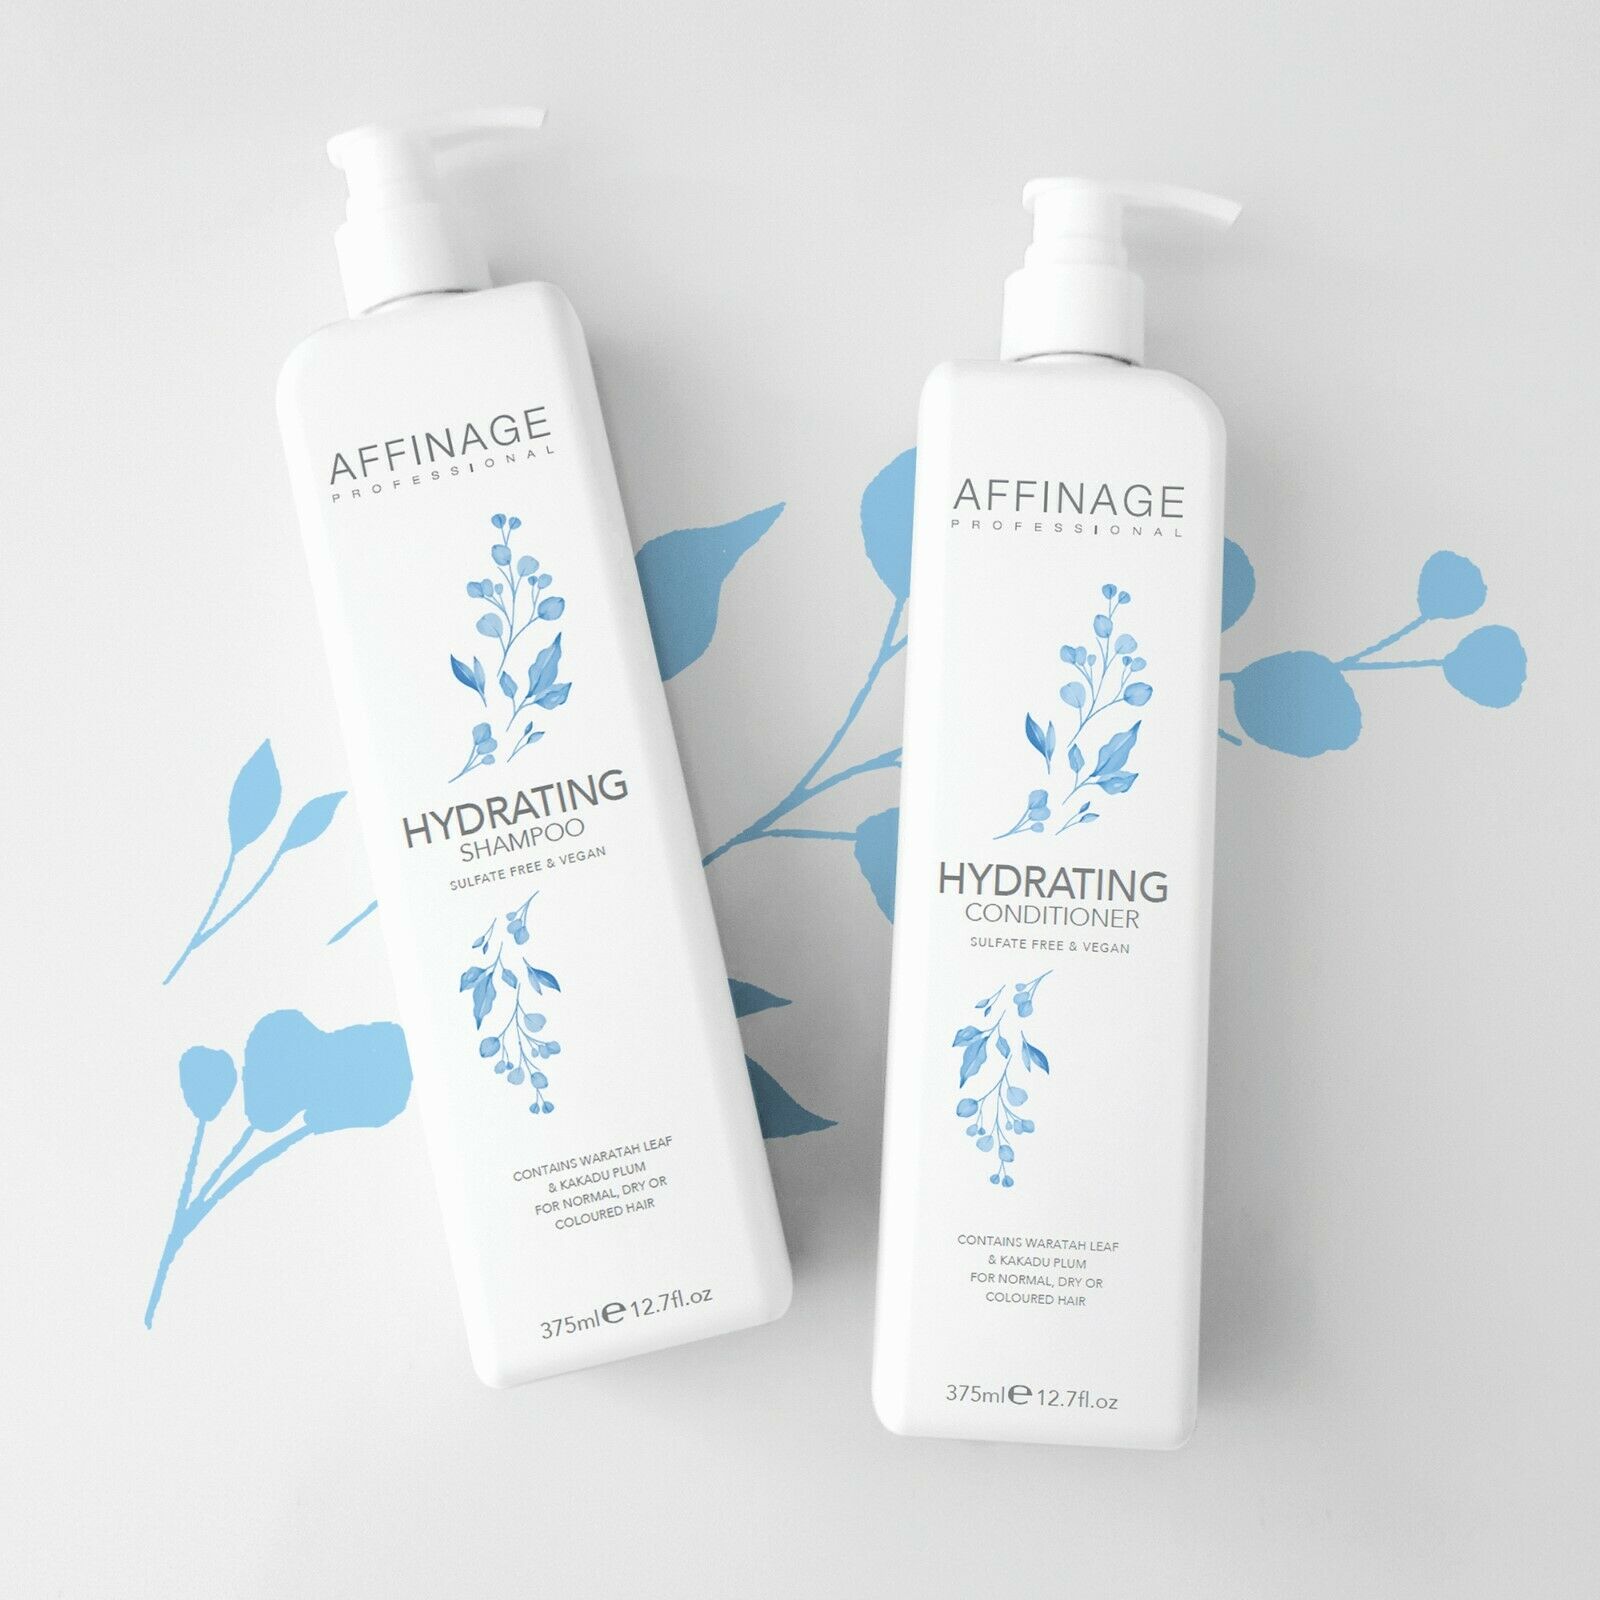 iaahhaircare,Affinage Professional Hydrating Shampoo & Conditioner 375ml Duo Aus Stock,Shampoos & Conditioners,affinage